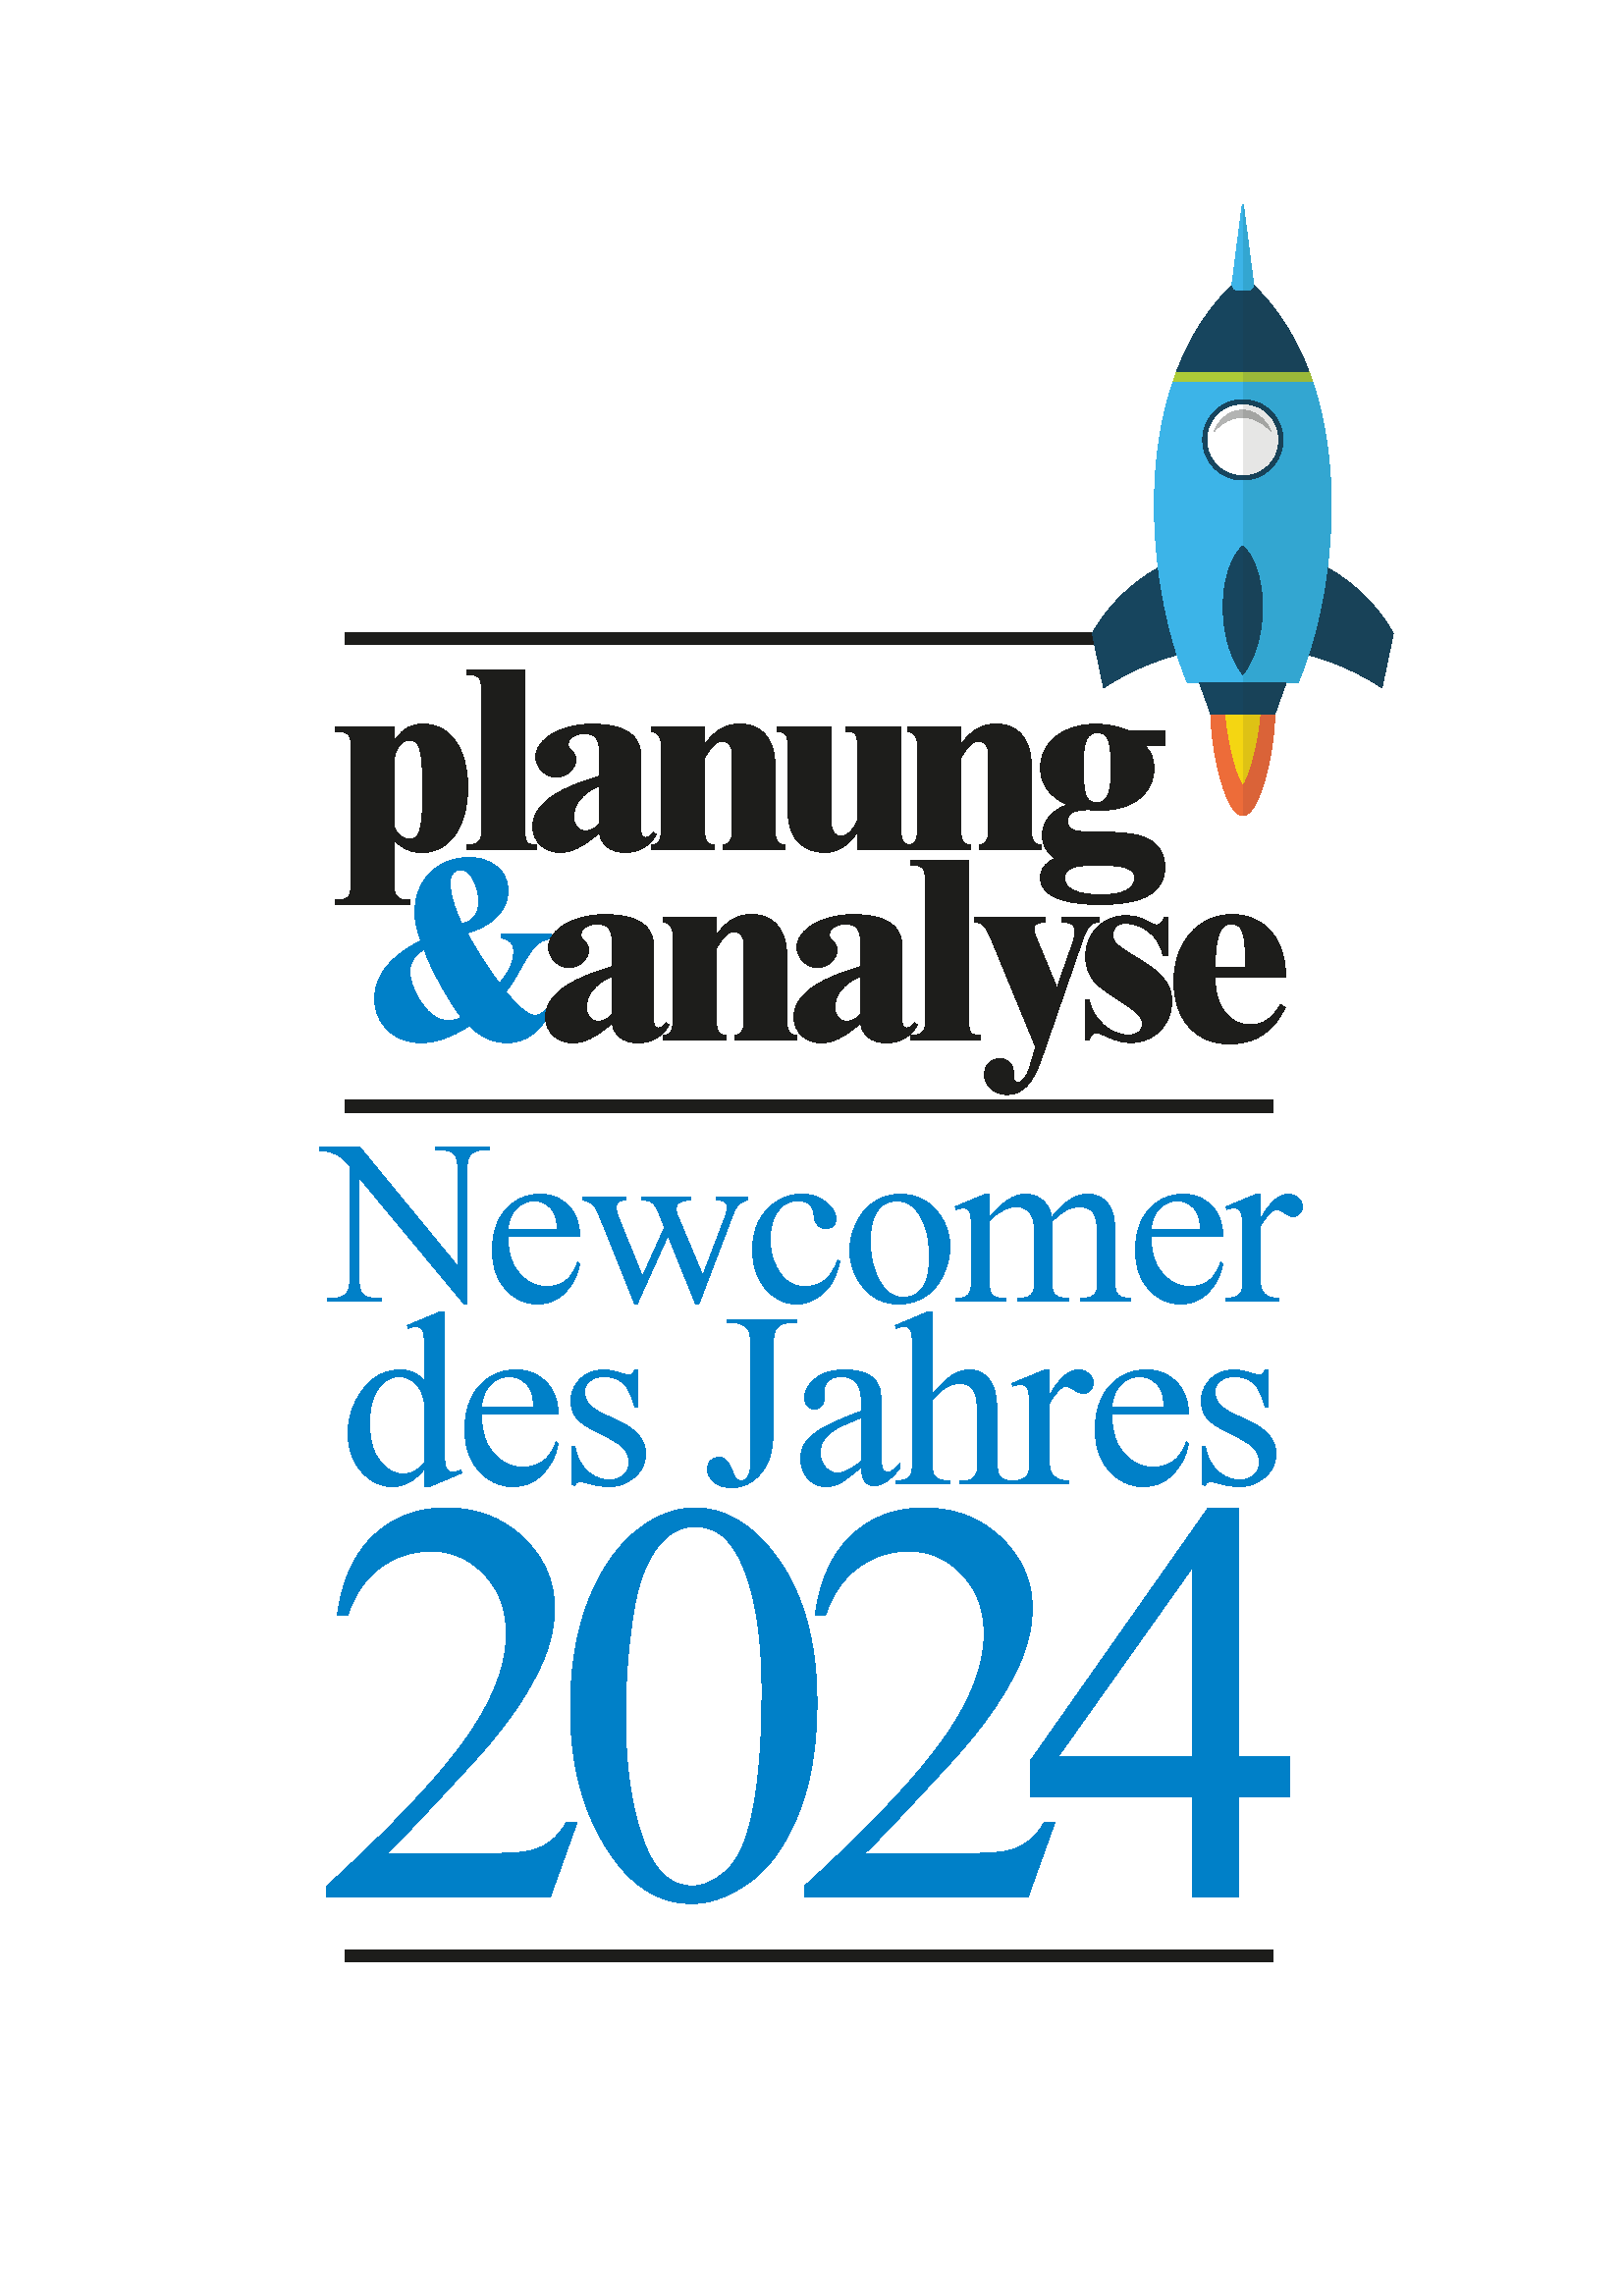 planung&analyse Newcomer des Jahres 2024